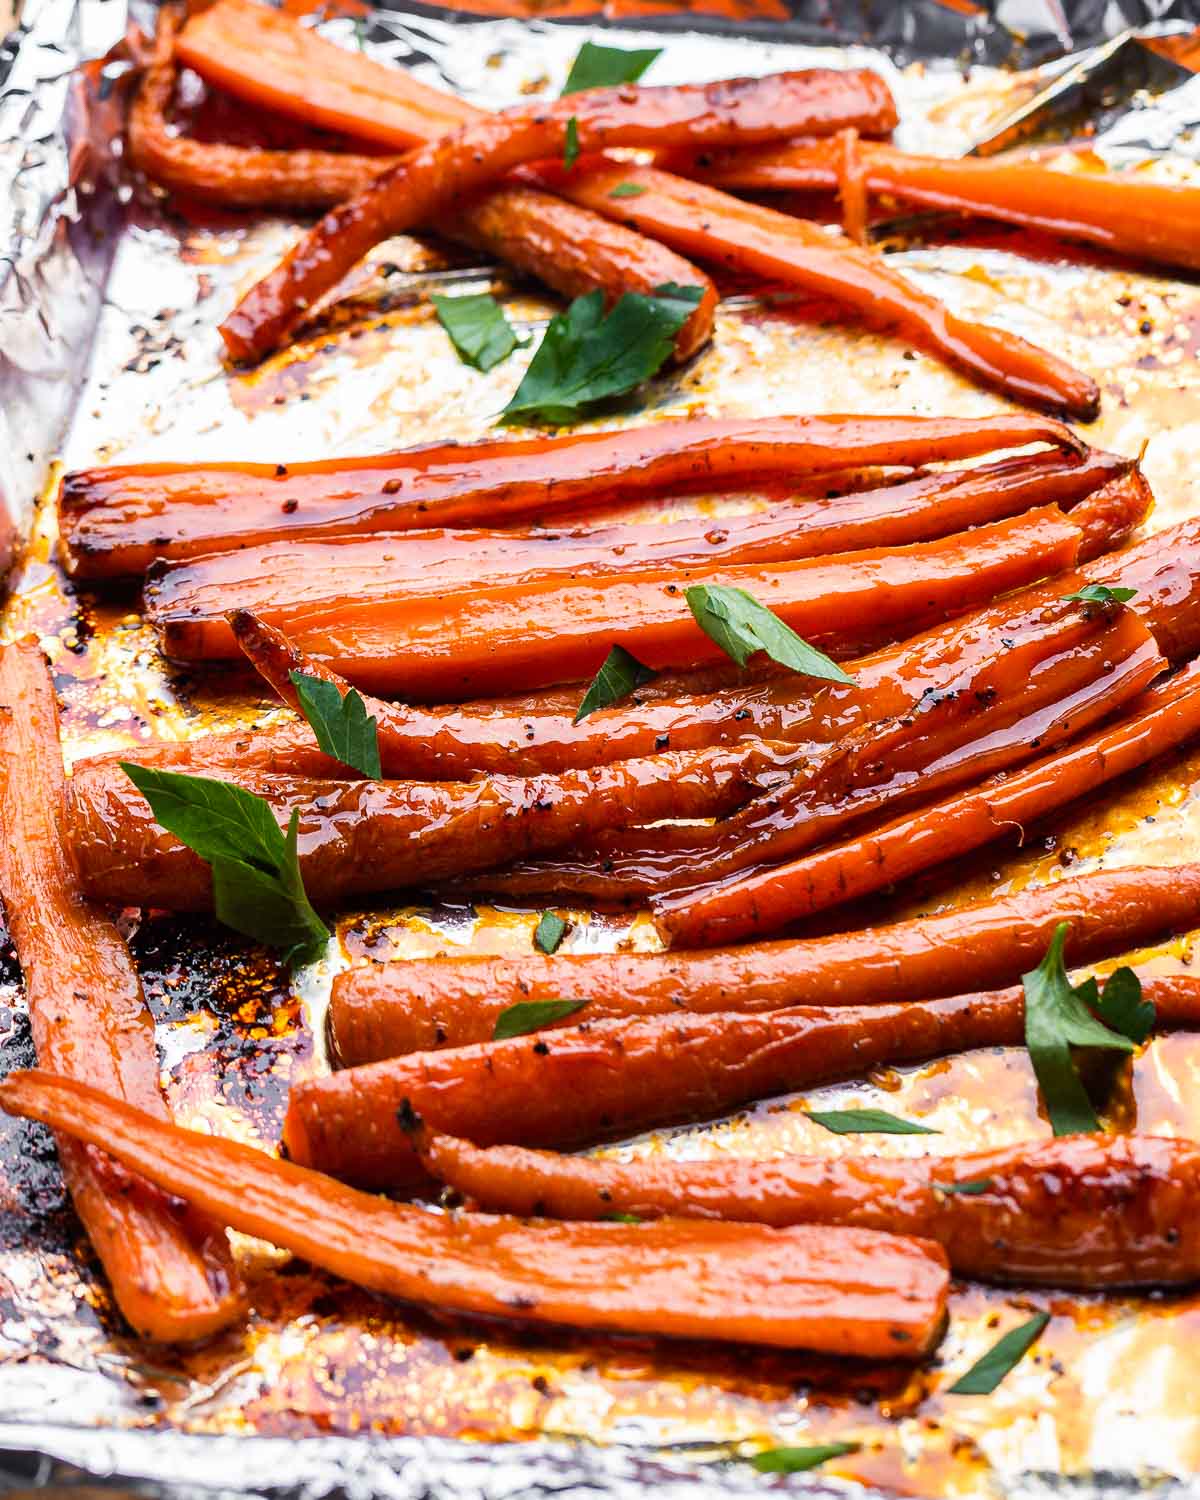 Foil lined baking sheet with glazed maple carrots.